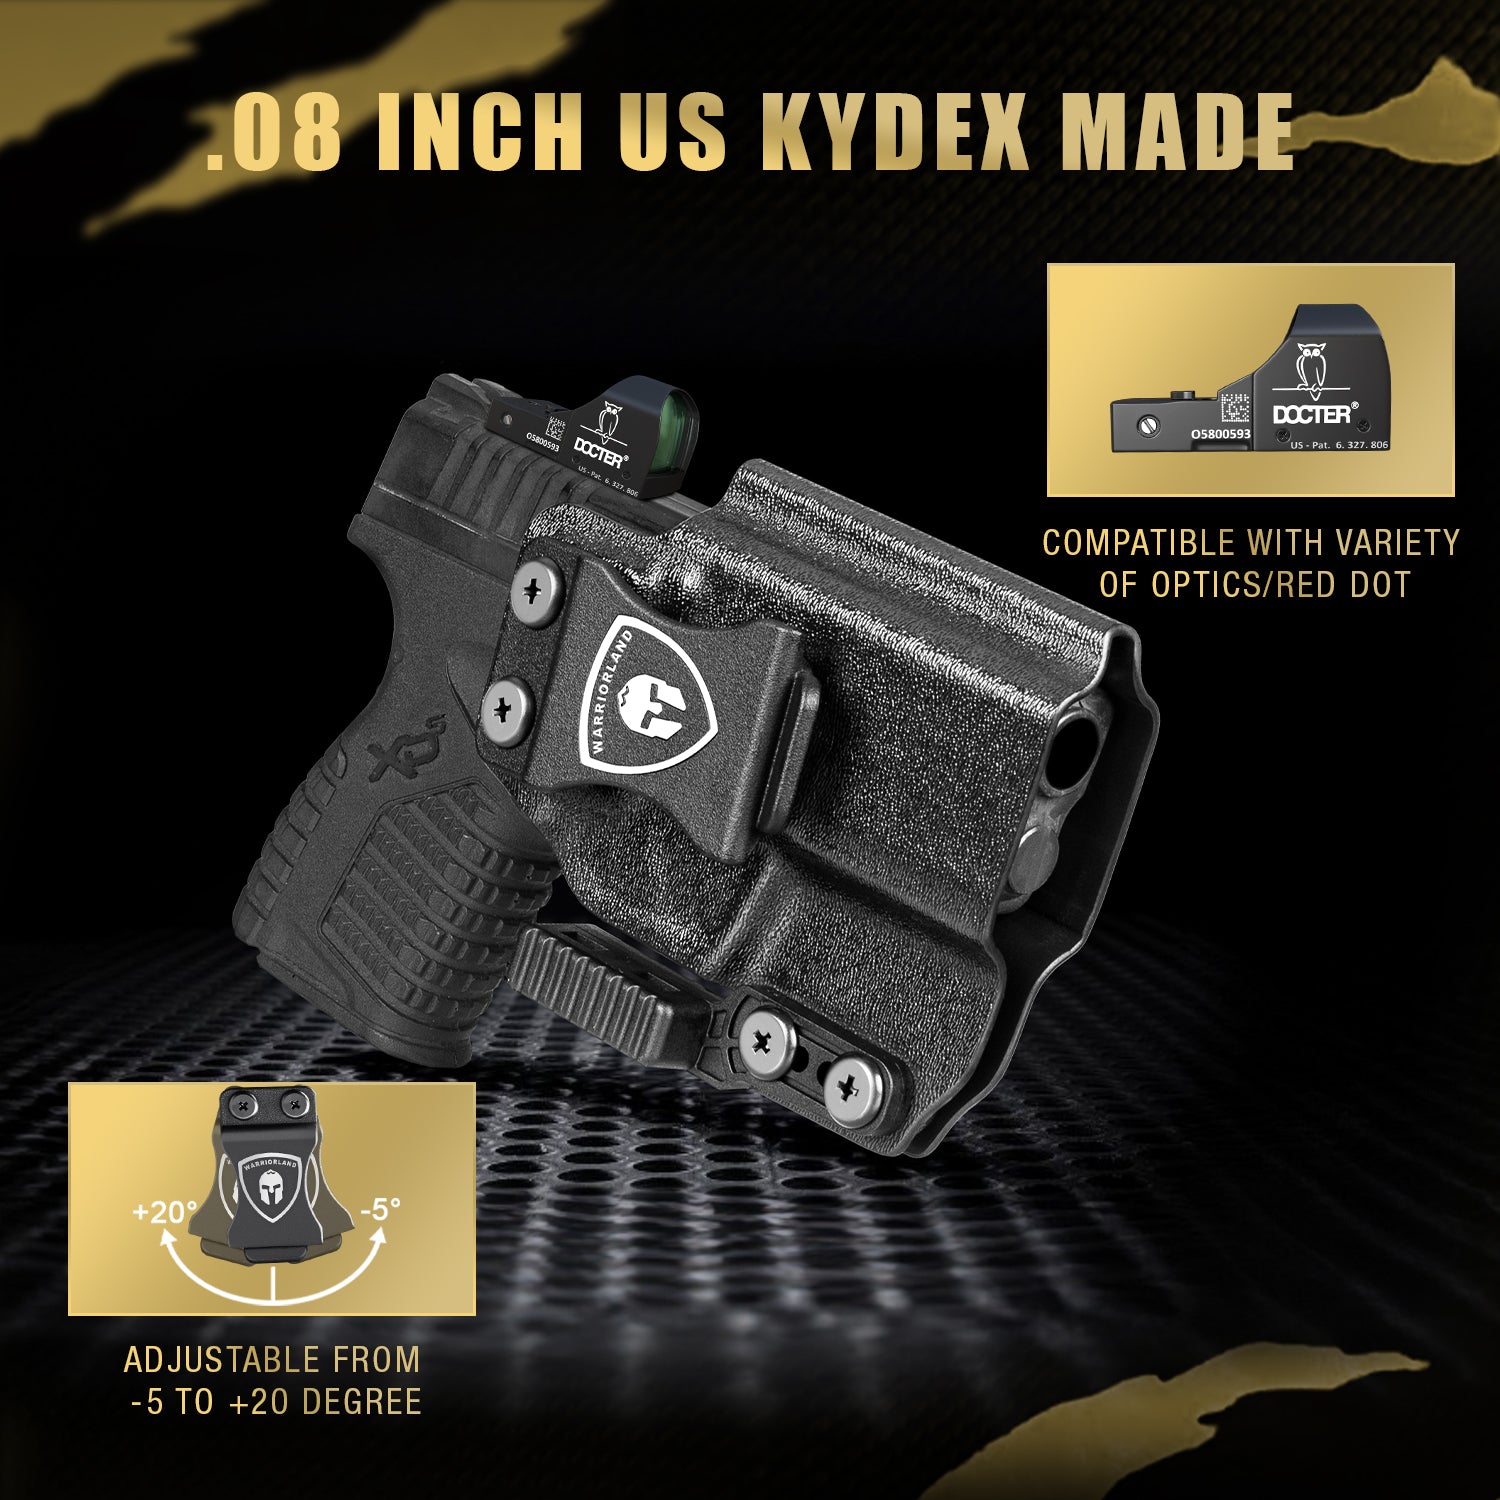 IWB Kydex Holster with Claw Attachment and Optic Cut Fit Springfield XD-S 3.3'' Pistol, Inside Waistband Appendix Carry XDS Holster, Adj. Cant & Retention, Right Hand|WARRIORLAND